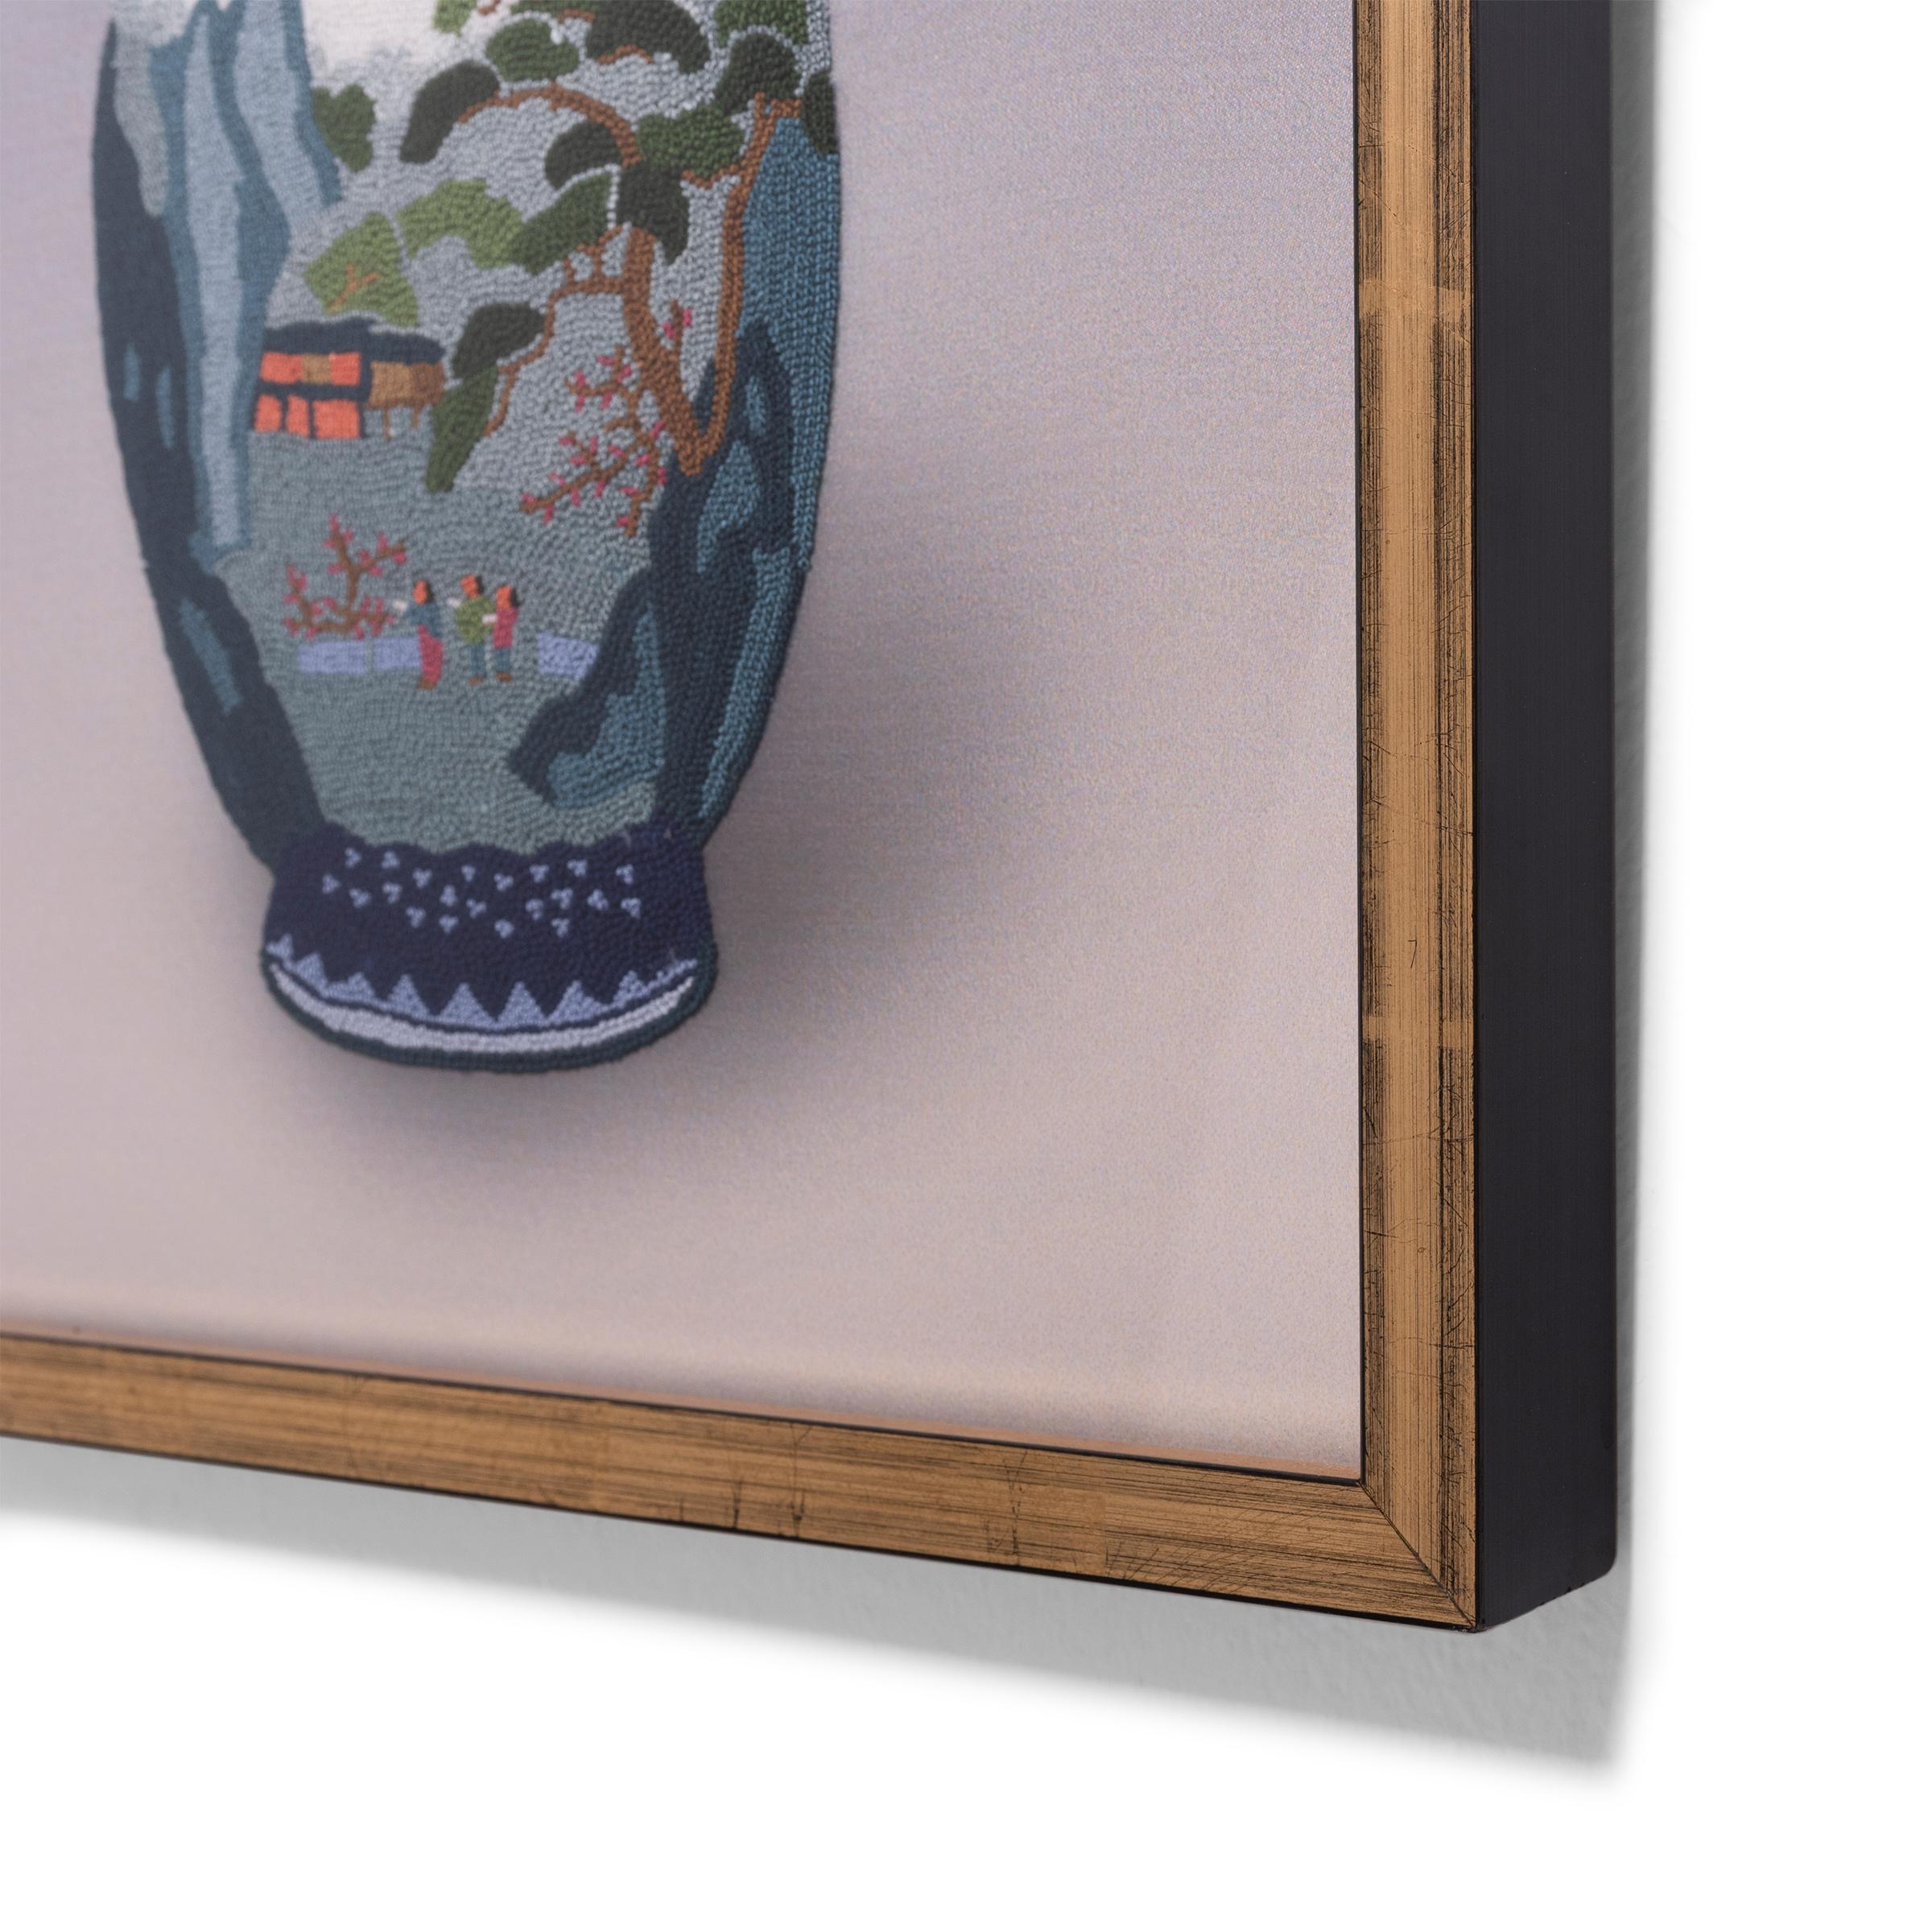 Chinese Forbidden Stitch Embroidery of Shan Shui Vase For Sale 1